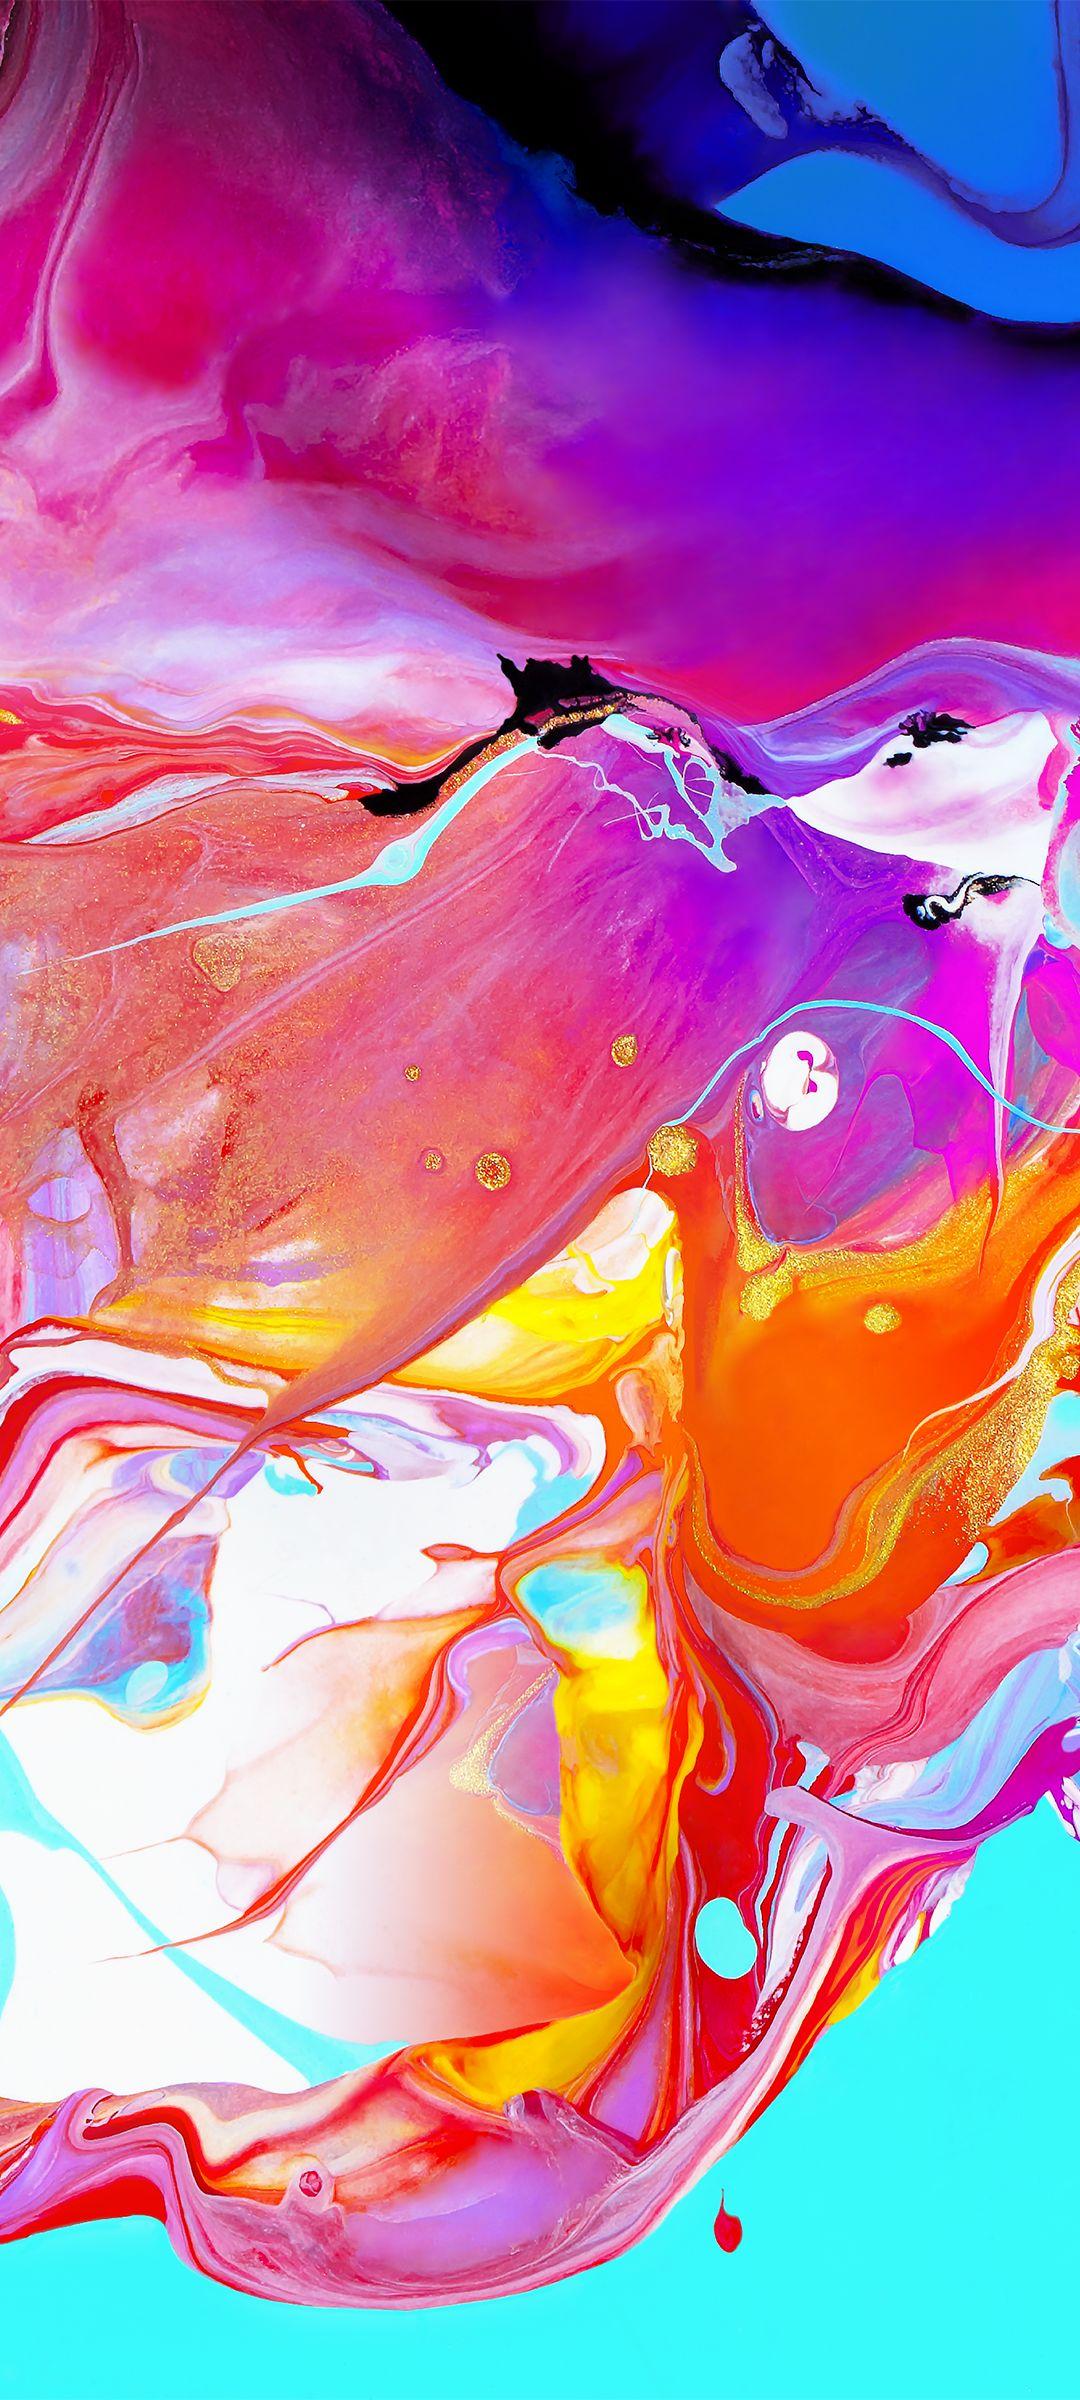 Samsung Galaxy A70 Stock Wallpapers 01